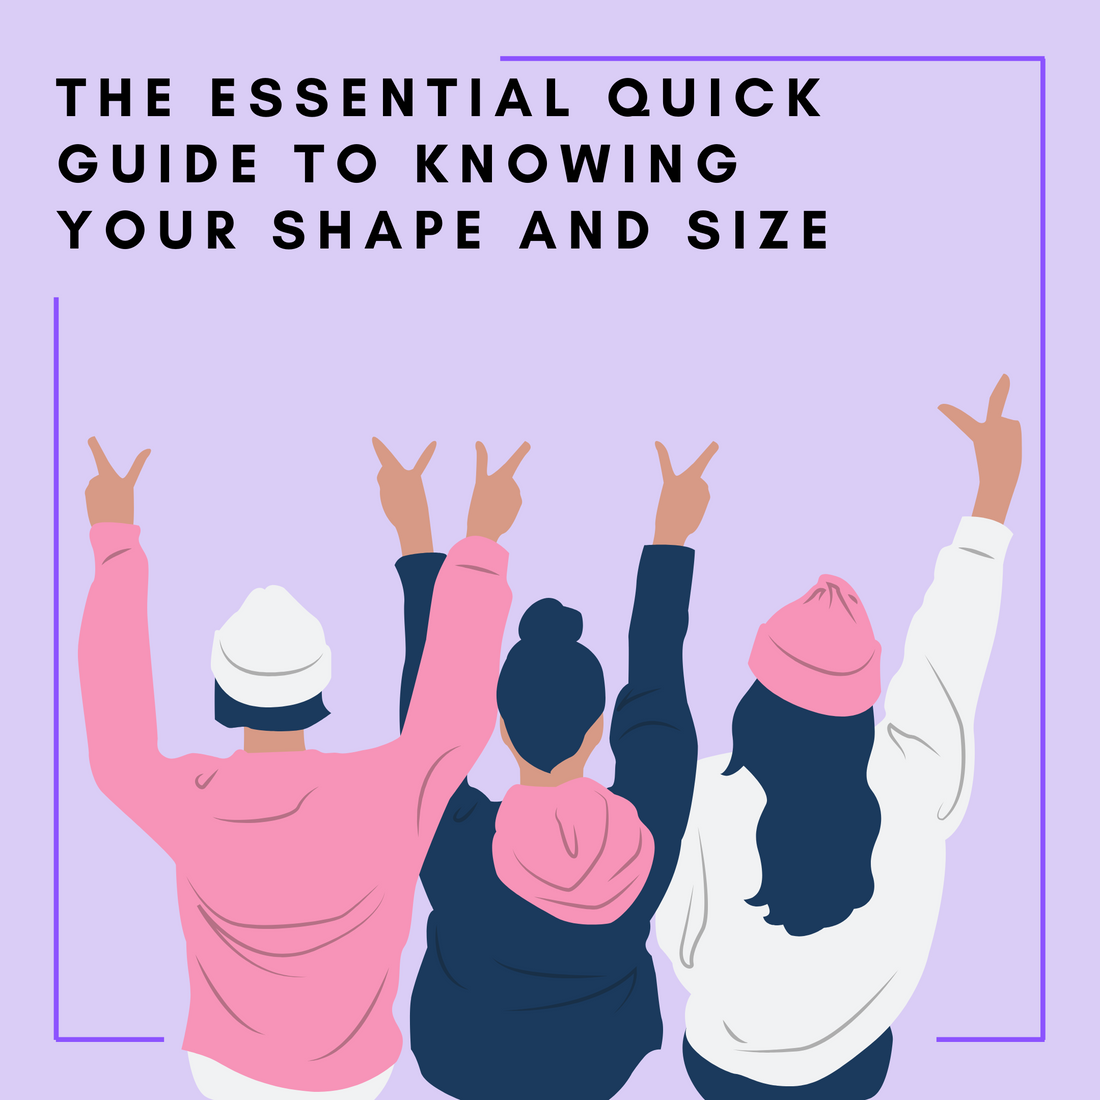 The Essential Quick Guide to Knowing Your Shape and Size